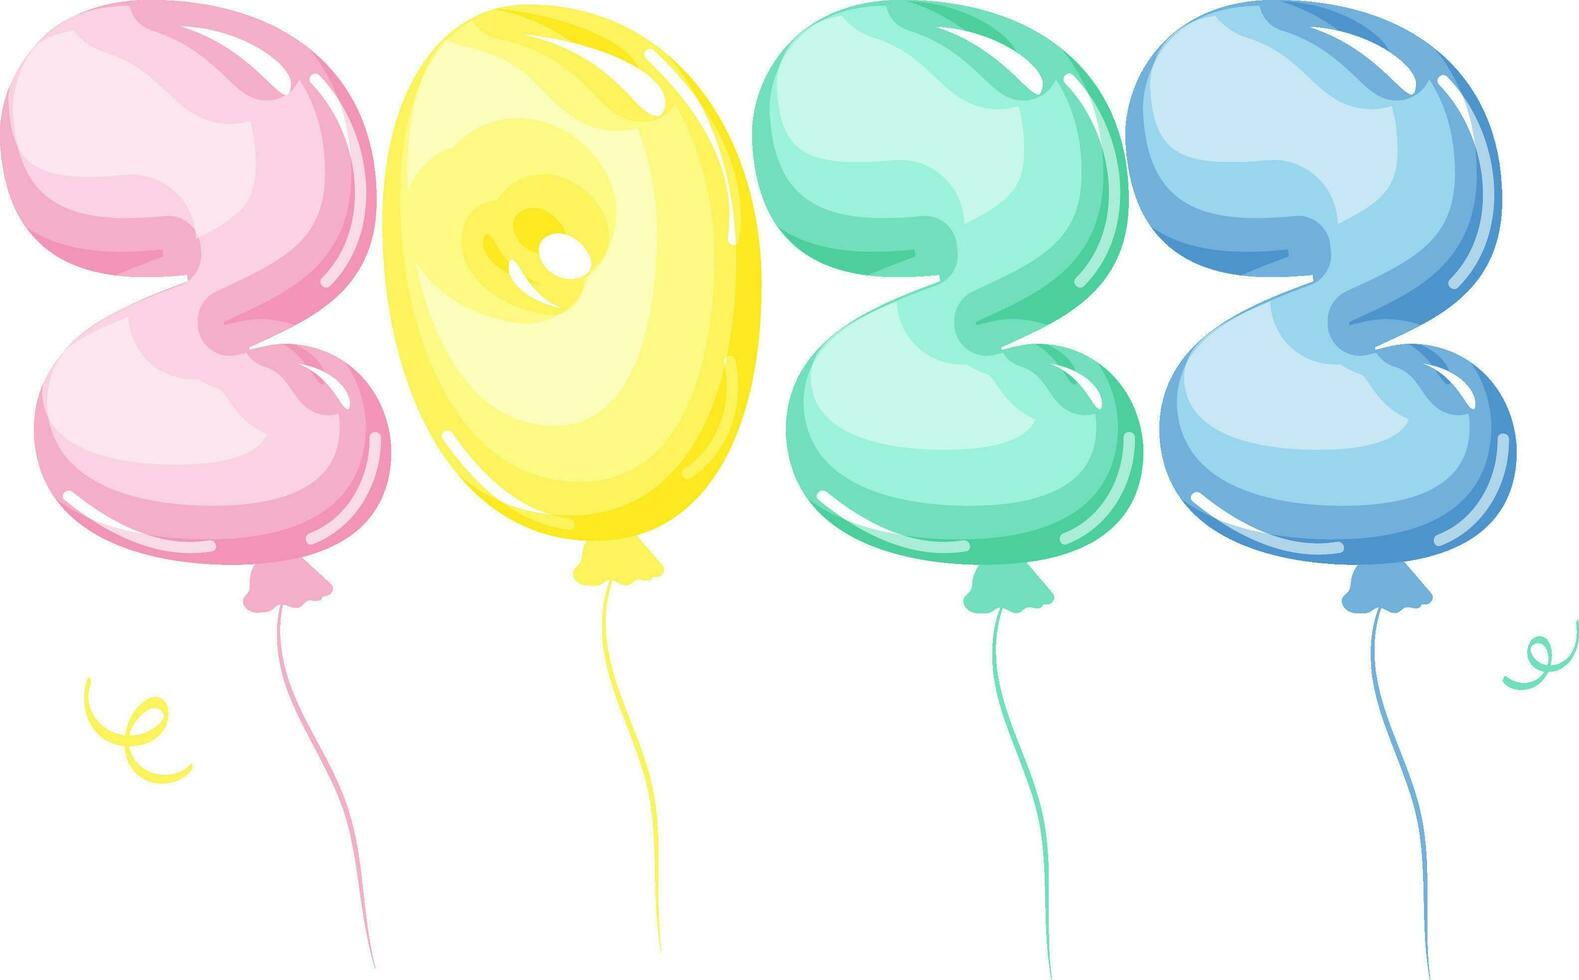 Colorful 2022 Balloon Number On White Background. vector